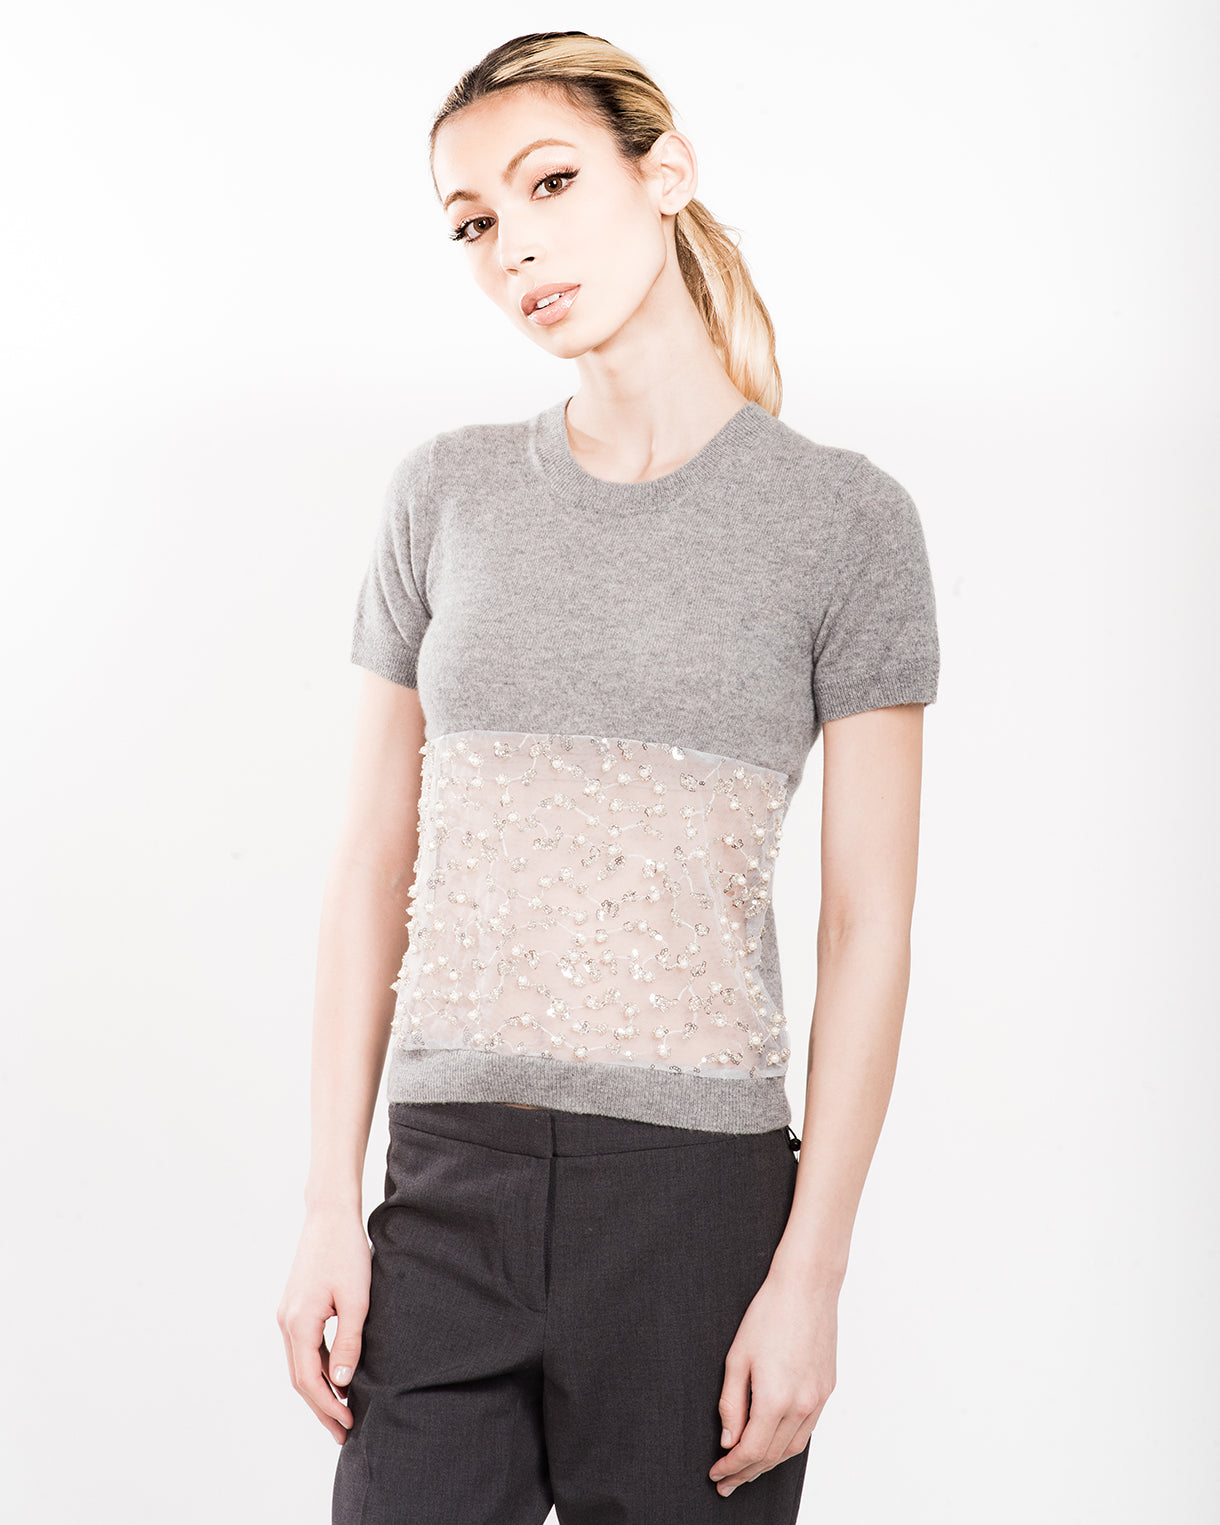 XS GREY SHORT SLEEVE CREW NECK CASHMERE SWEATER WITH FRONT WAIST PEEKABOO DETAIL OF PEARL, CRYSTAL AND MINI SEQUIN BEADING EMBROIDERED ON WHITE TULLE WITH WHITE SILK ORGANZA LINING